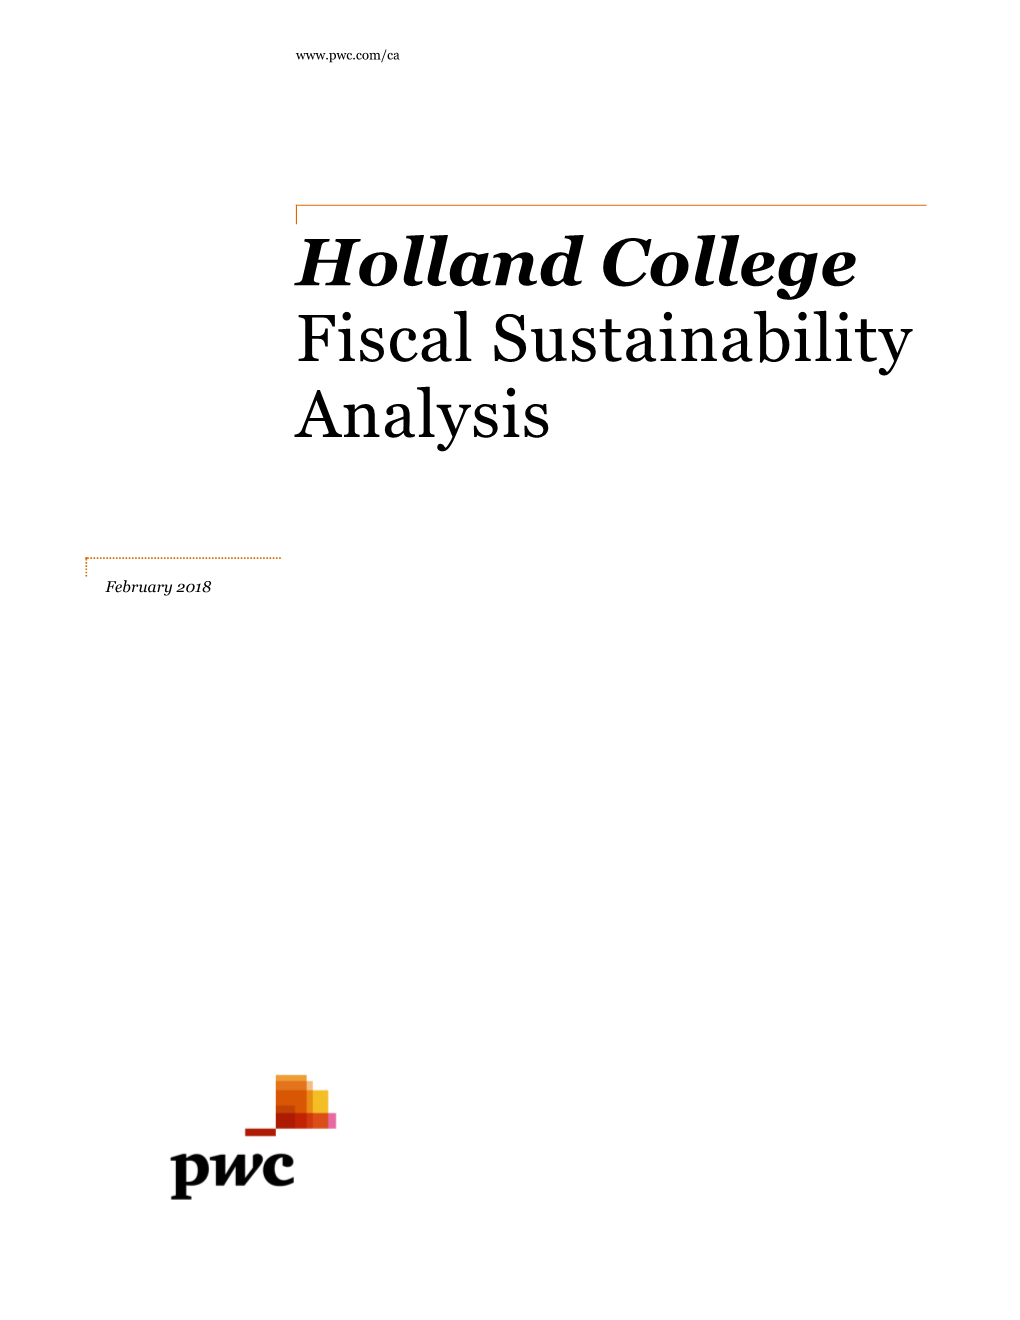 Holland College Fiscal Sustainability Analysis